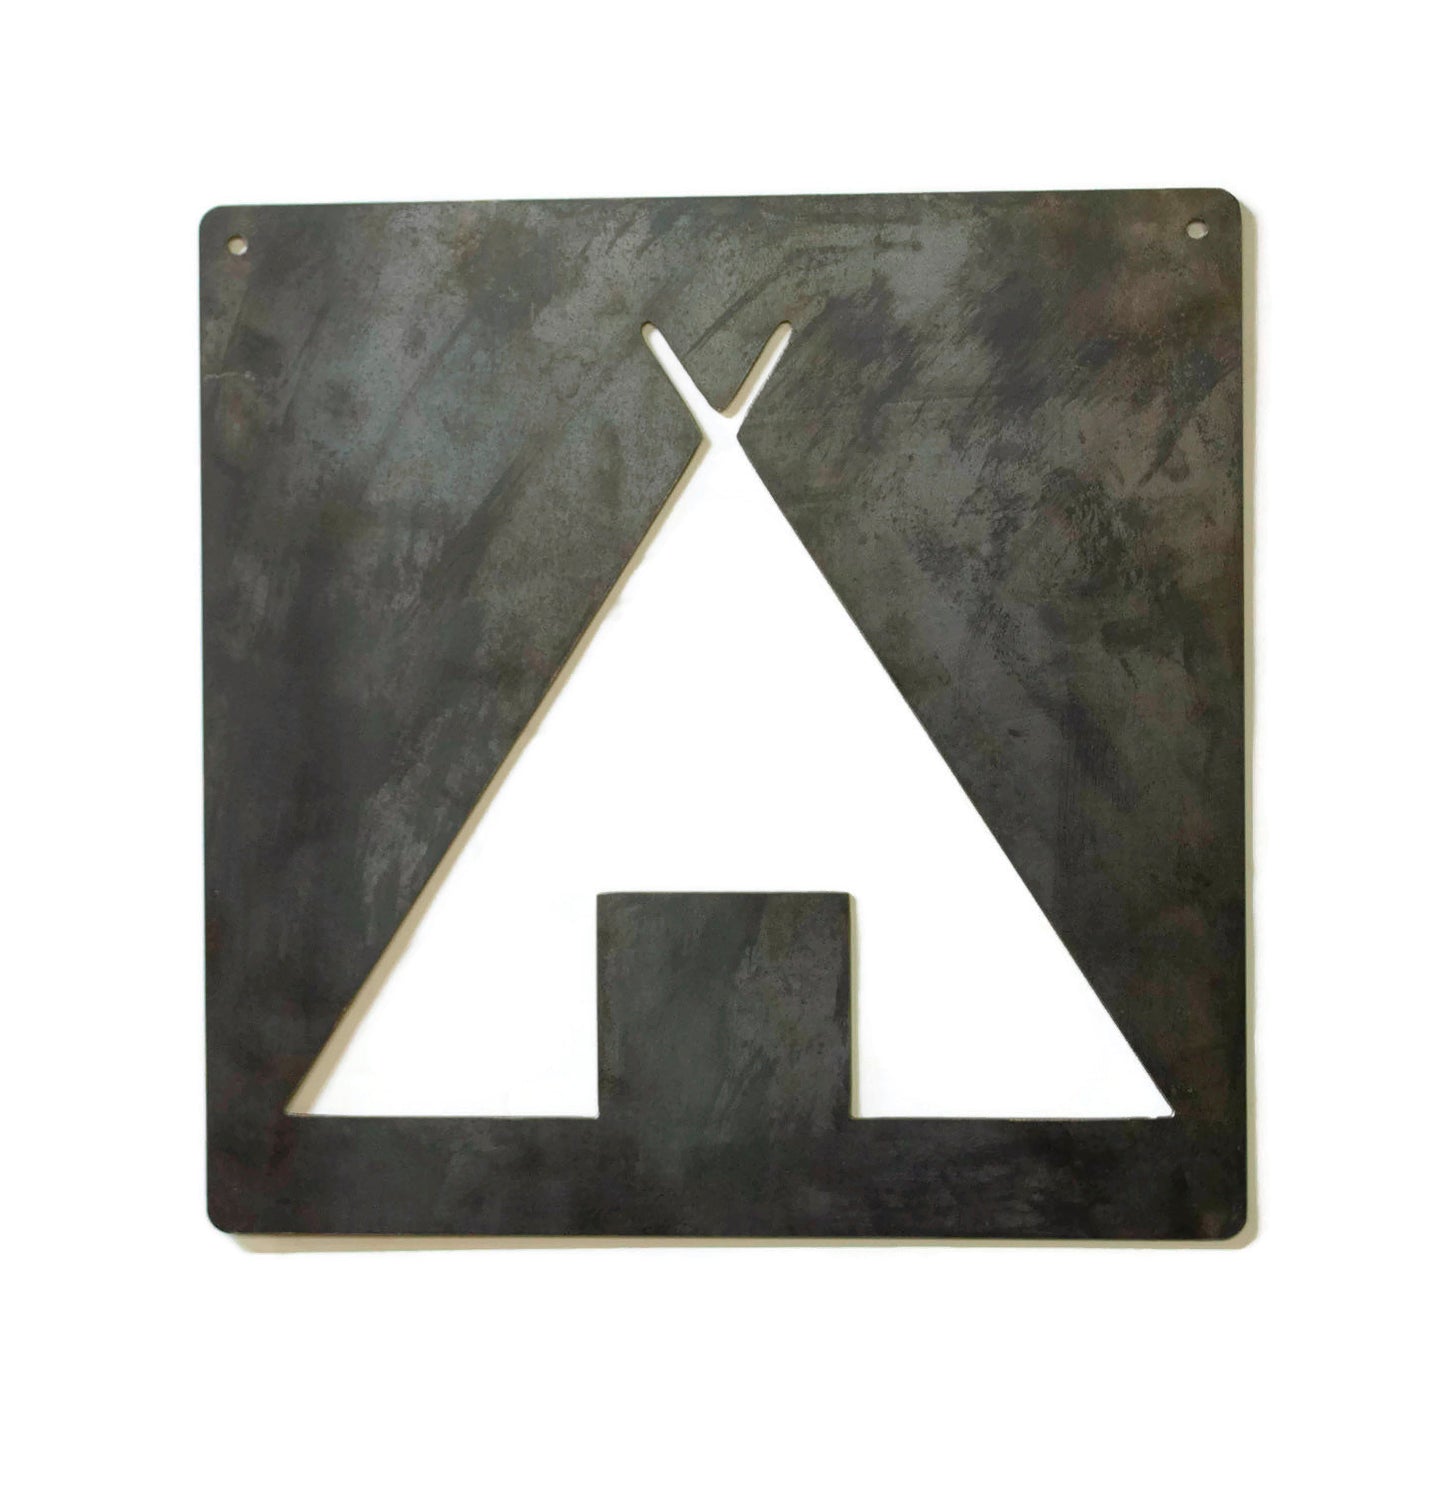 Campsite Symbol Metal Wall Hanging, Raw Industrial Steel, Hiking, Camping, Travel